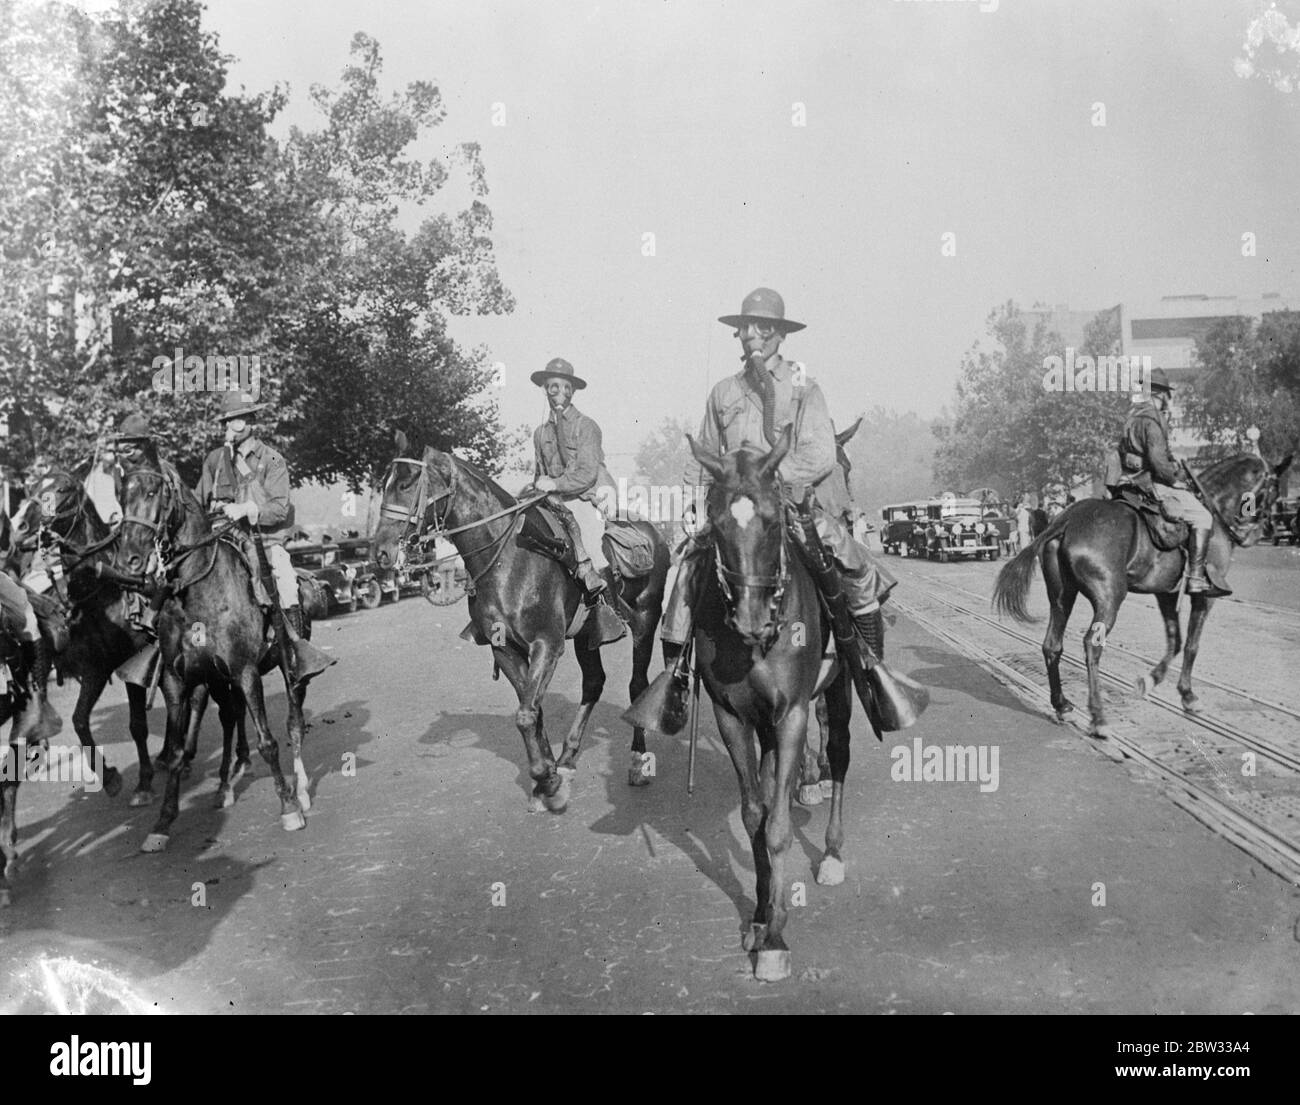 Bonus army camp burned to the ground and marches dispered in fierce fight at Washington . Federal troops completely routed eight thousand ' bonus army ' marchers encamped open parkland outside Washington , and burned their camp of wooden shacks to the ground . Cavalrymen in gas masks advancing down Pennsylvania Avenue , Washington during the fighting . 5 August 1932 Stock Photo